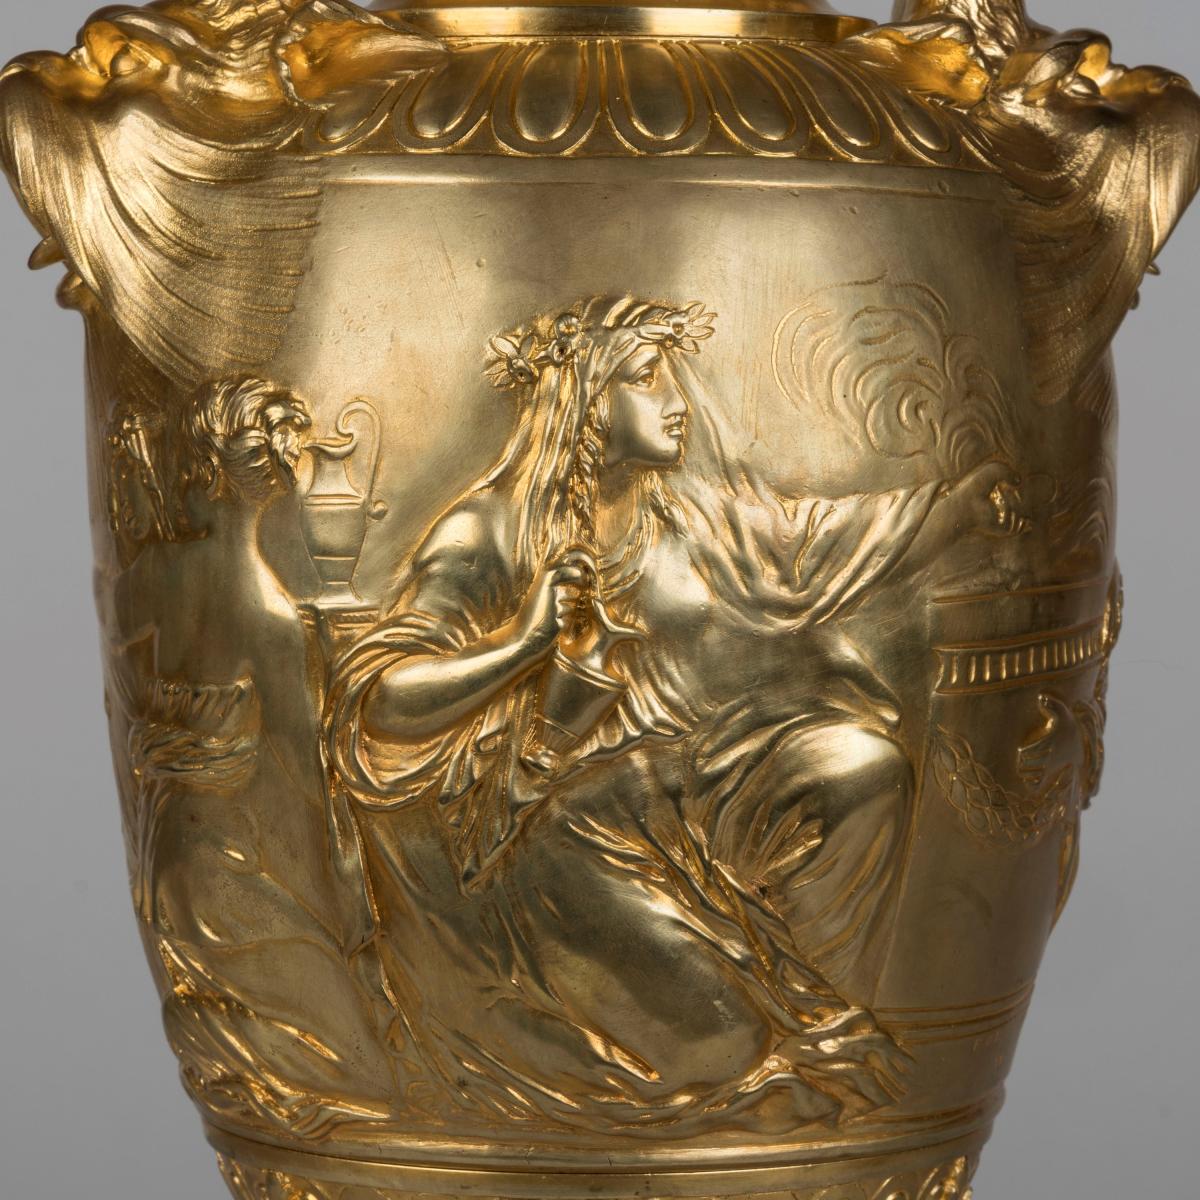 A Pair of Bronze Vases Depicting the 'Sacrifice to Venus' cast by Barbedienne